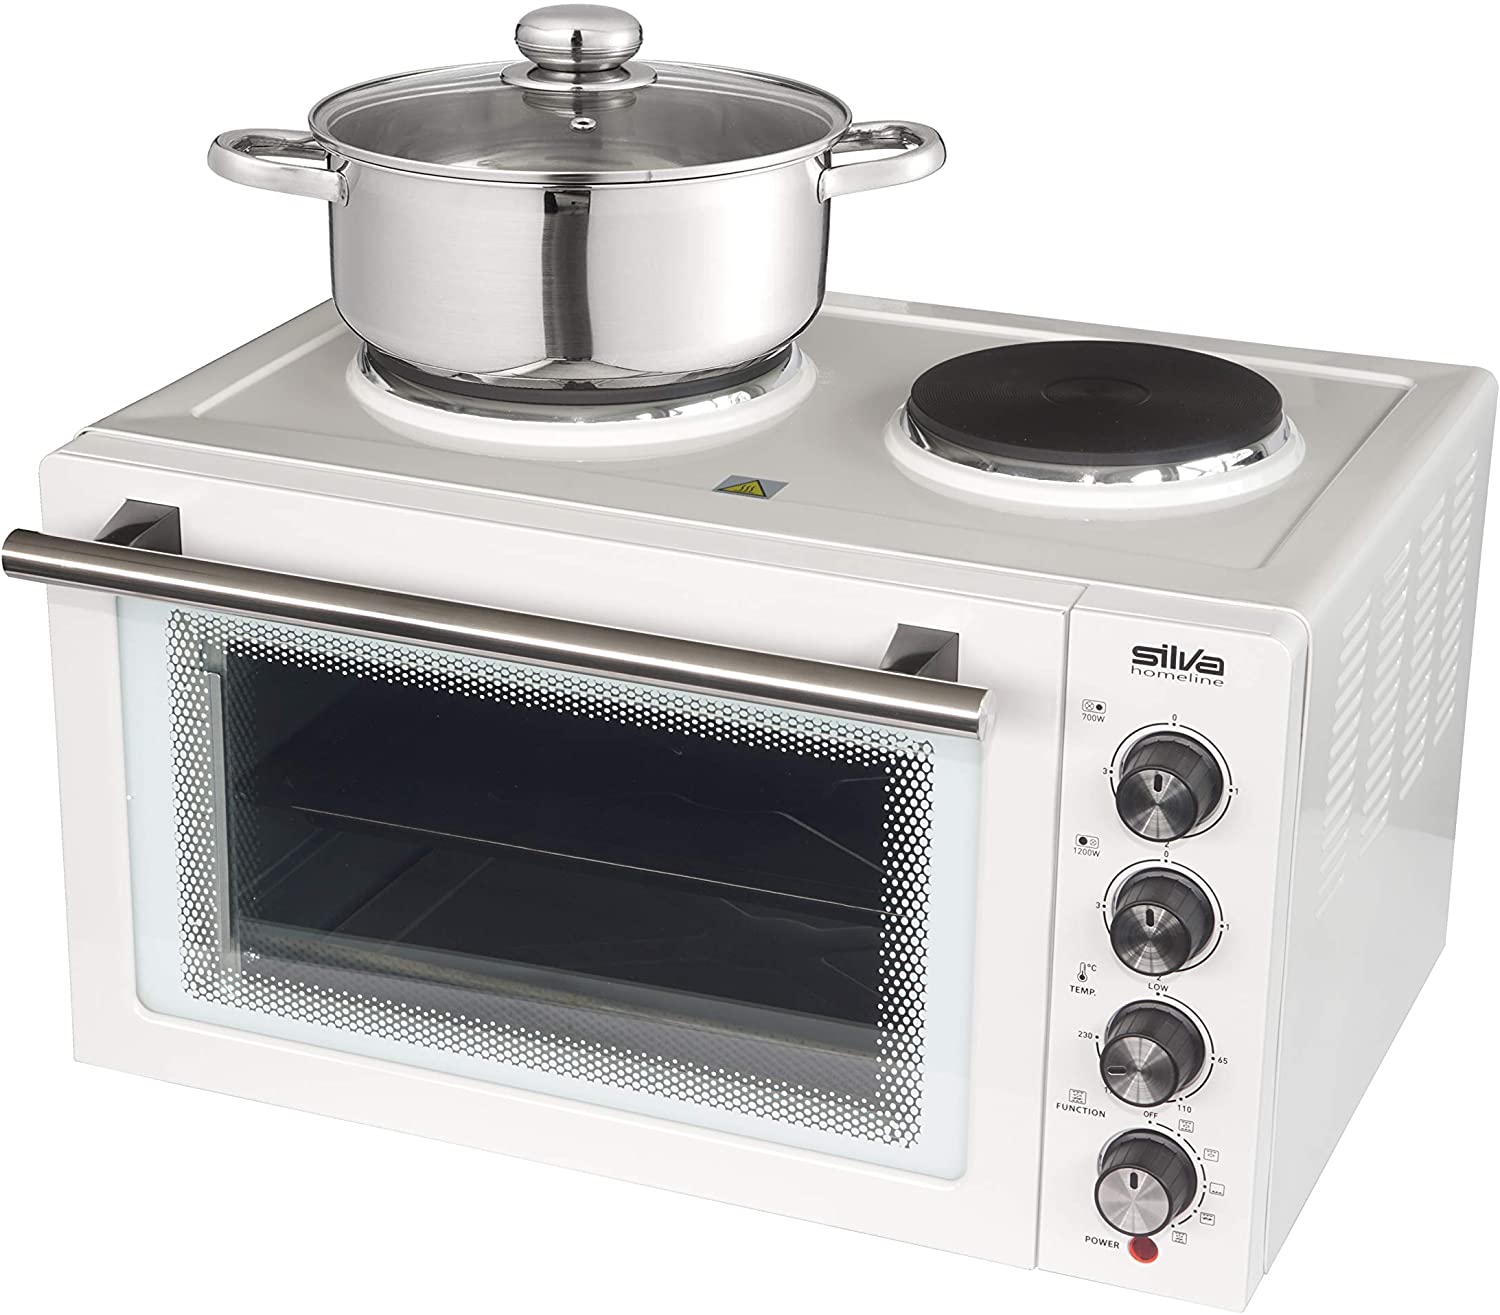 Silva-Homeline Silva Homeline 440102 KK 2900 Mini Oven with Grill Function Hot Air Function with Grills 3300 W 230 V